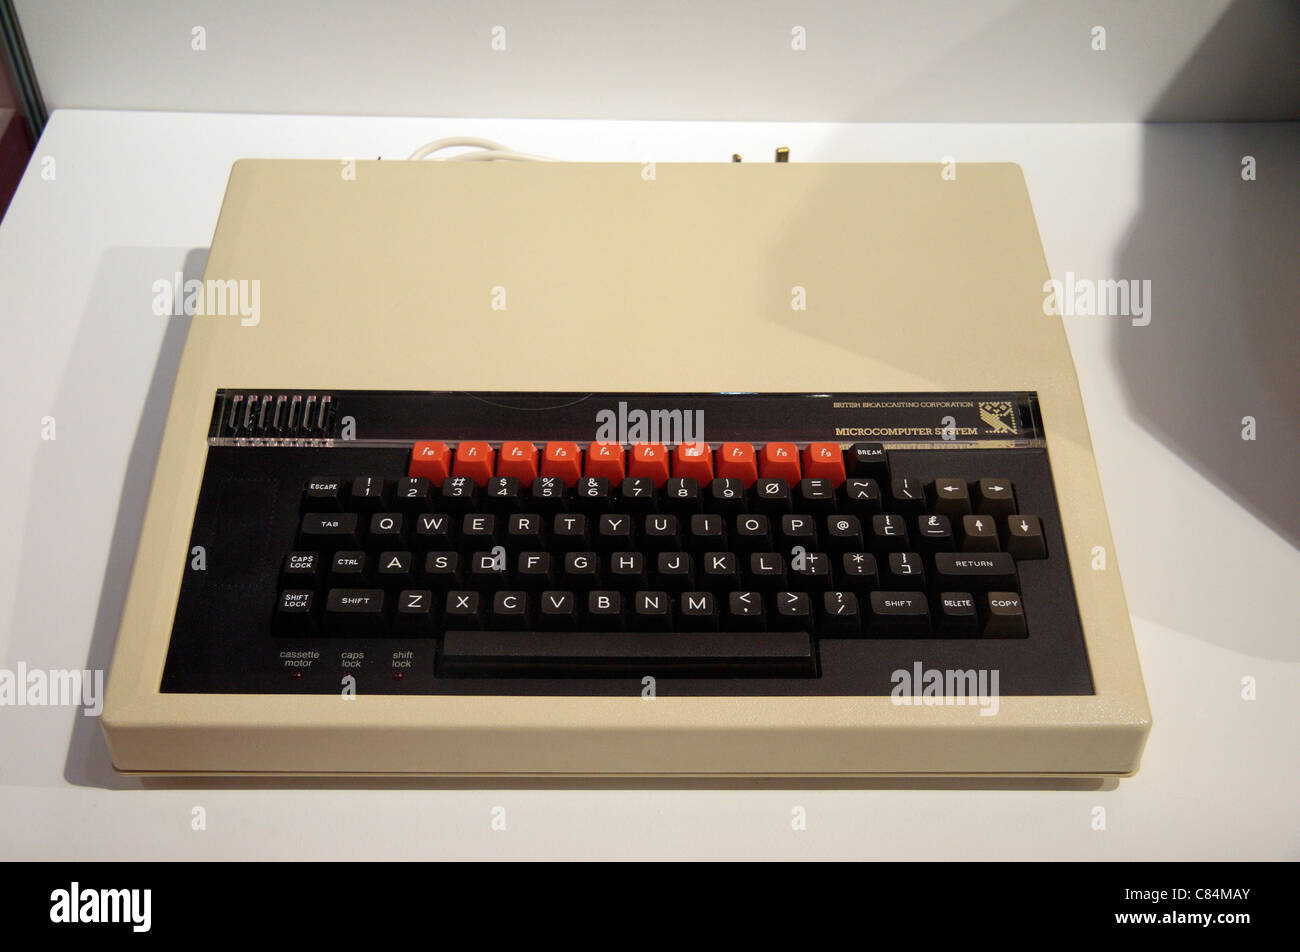 A BBC microcomputer (BBC Micro) by Acorn Computers on display at the Museum of Science & Industry (MOSI), Manchester, UK. Stock Photo